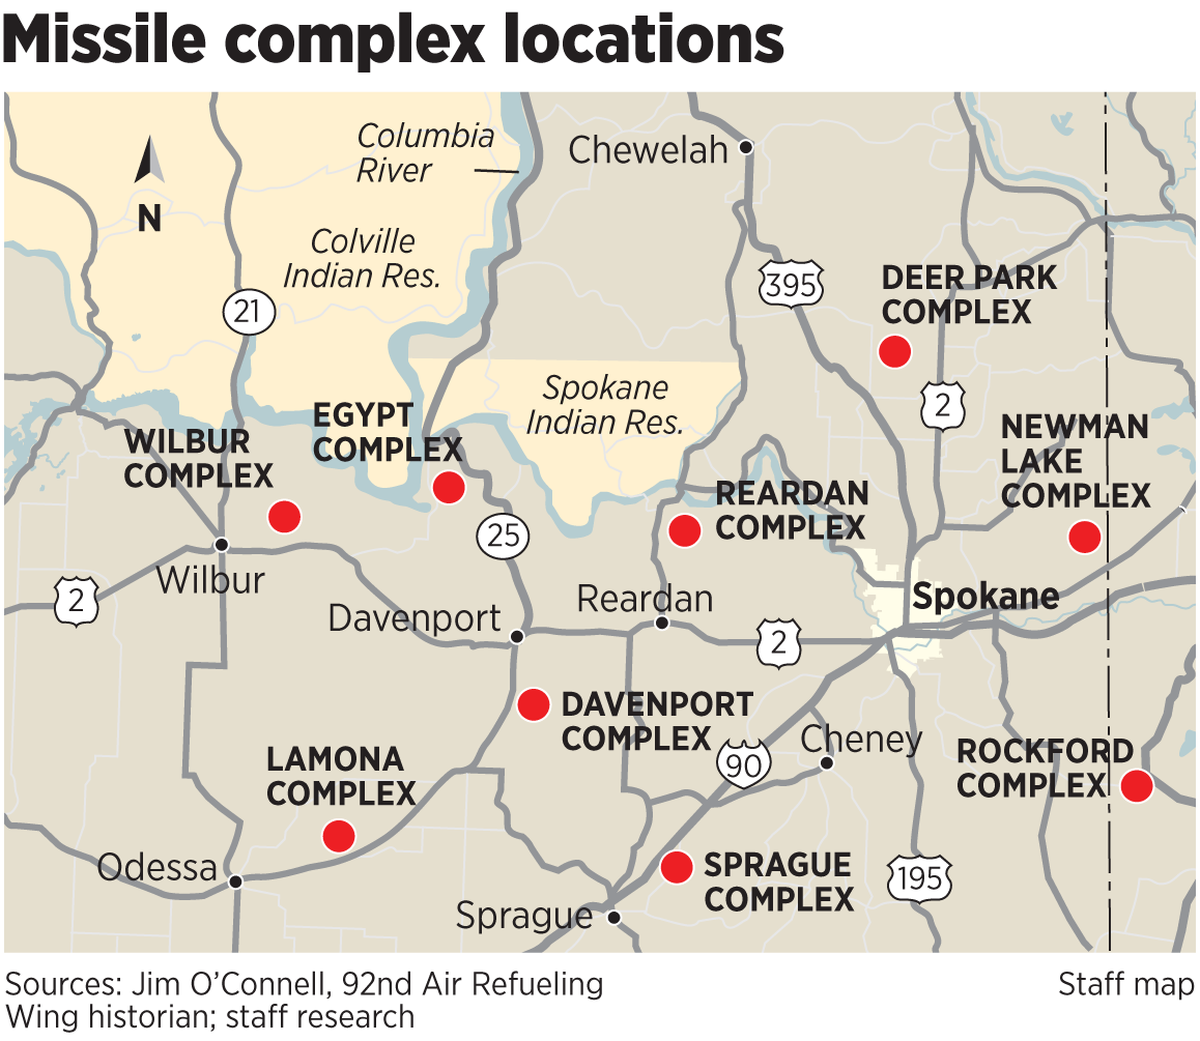 Missile launch complexes in the Spokane area (Staff map)